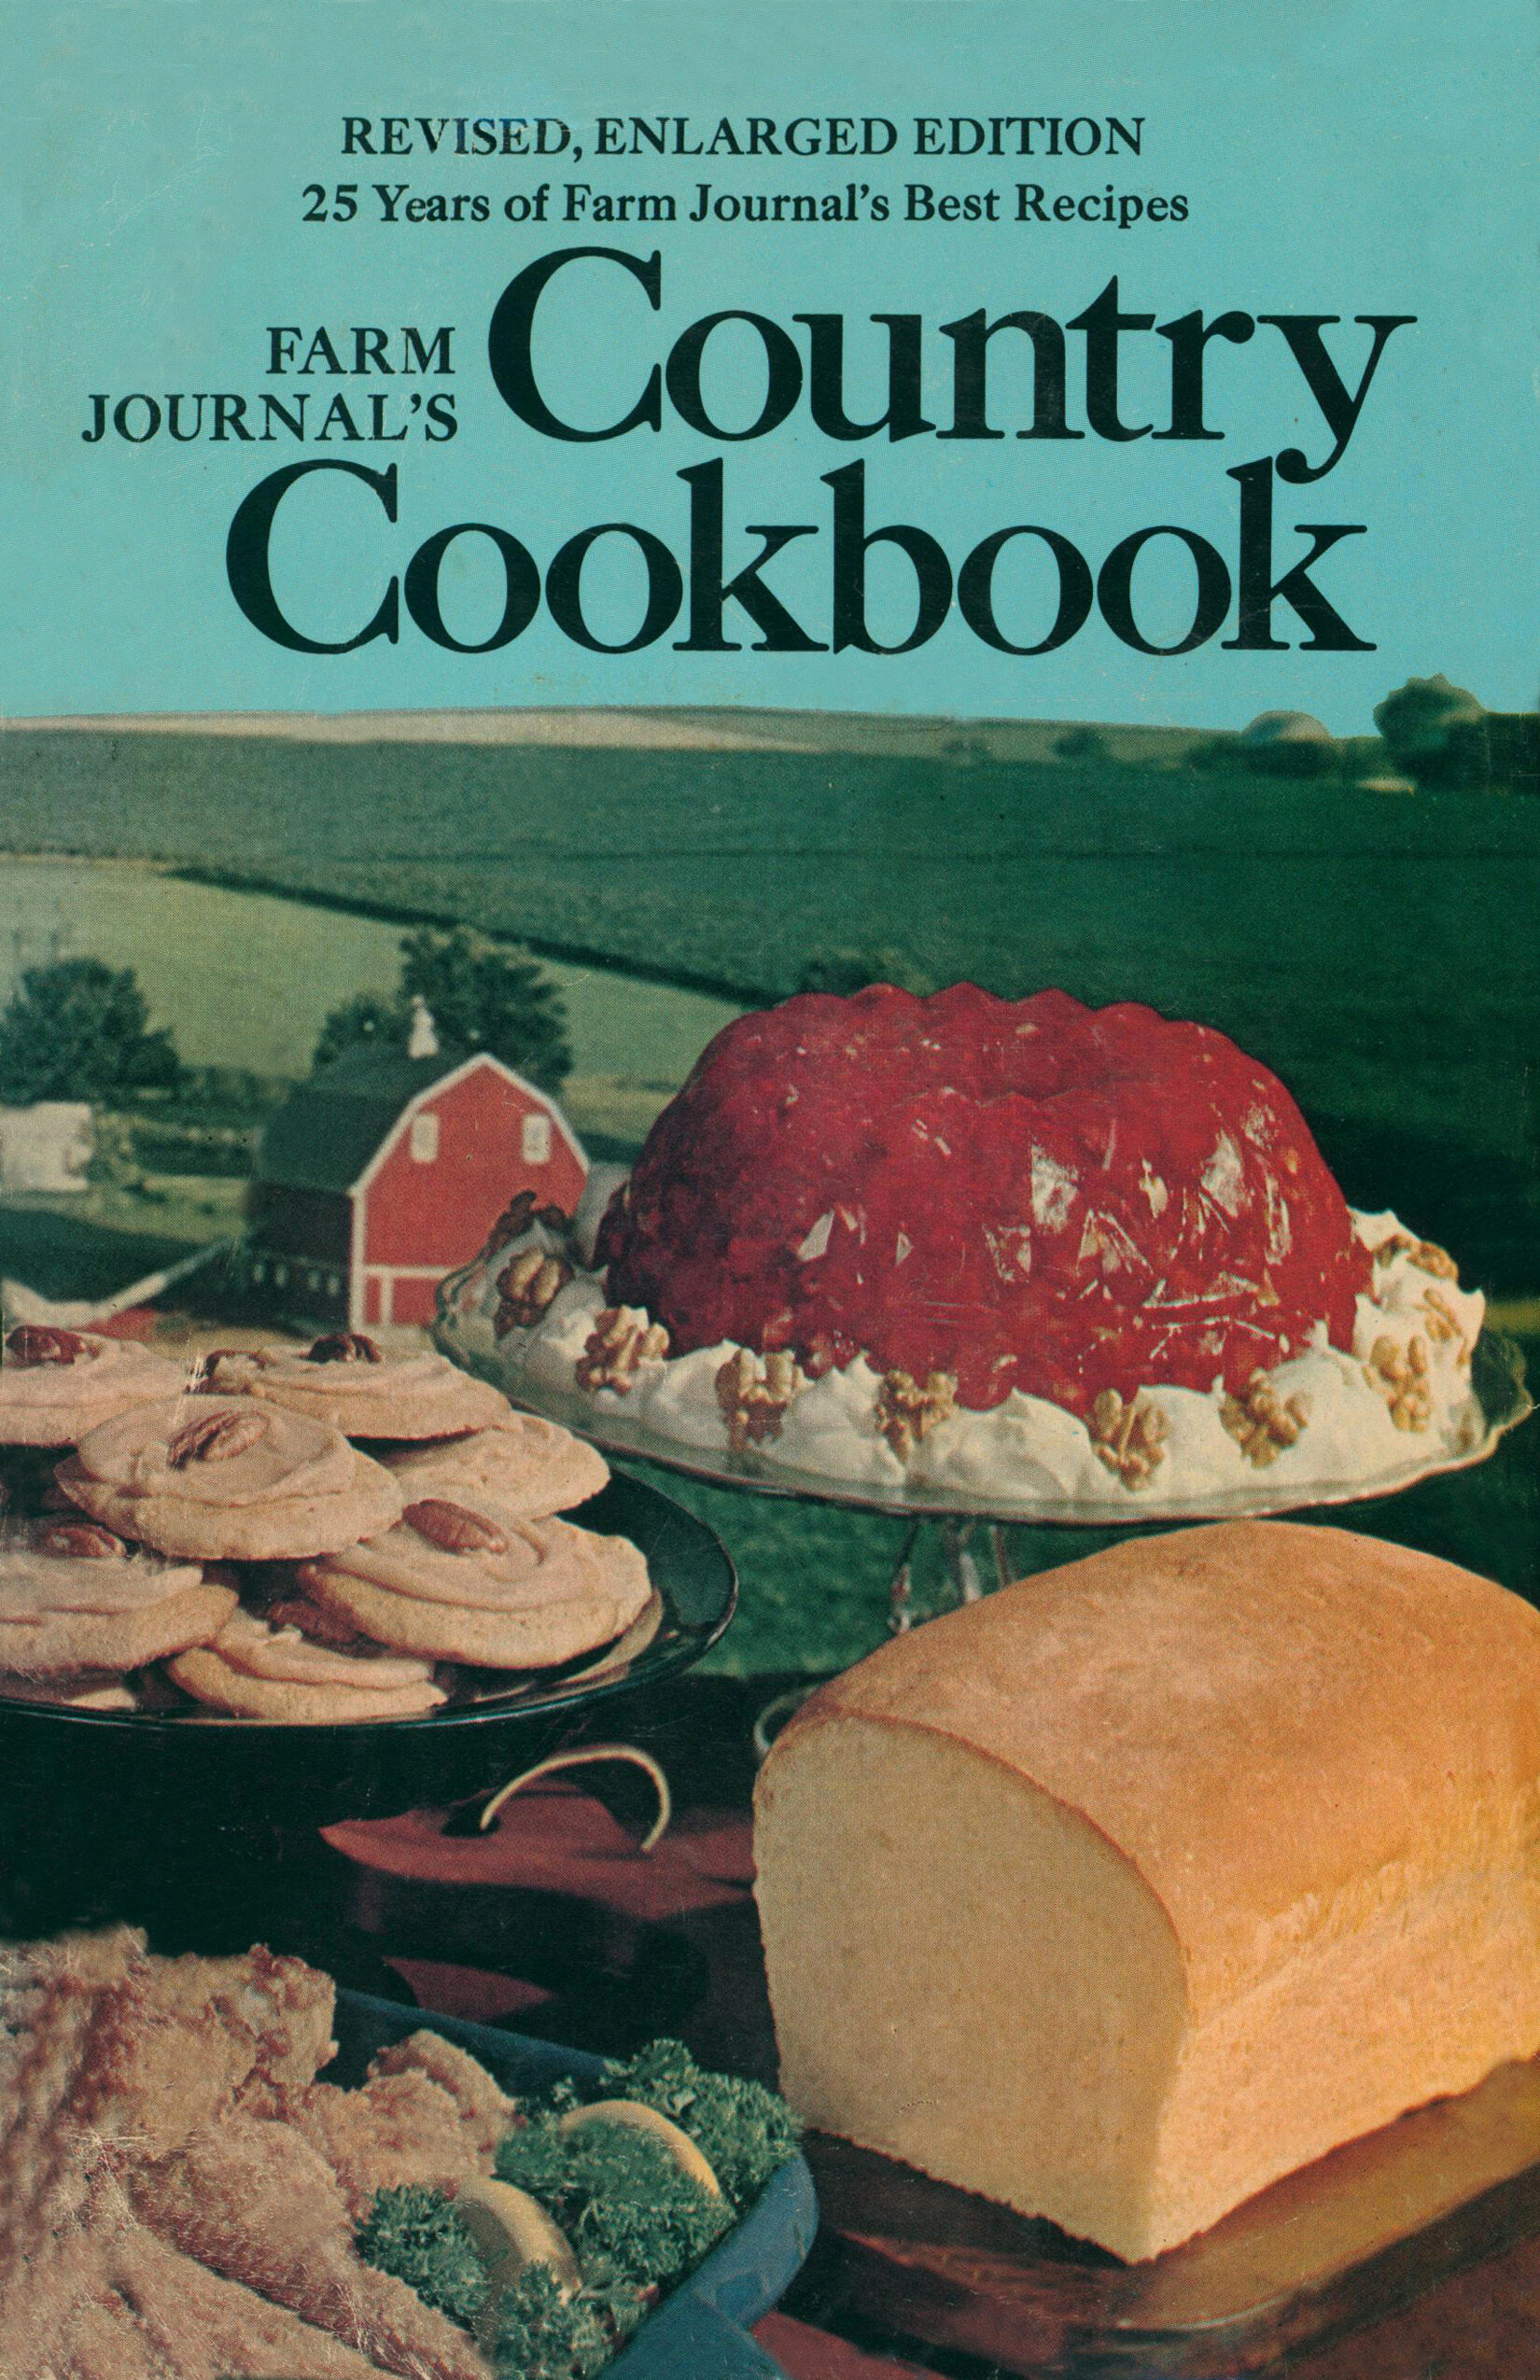 Behind The Cookbook: Farm Journal’s Country Cookbook